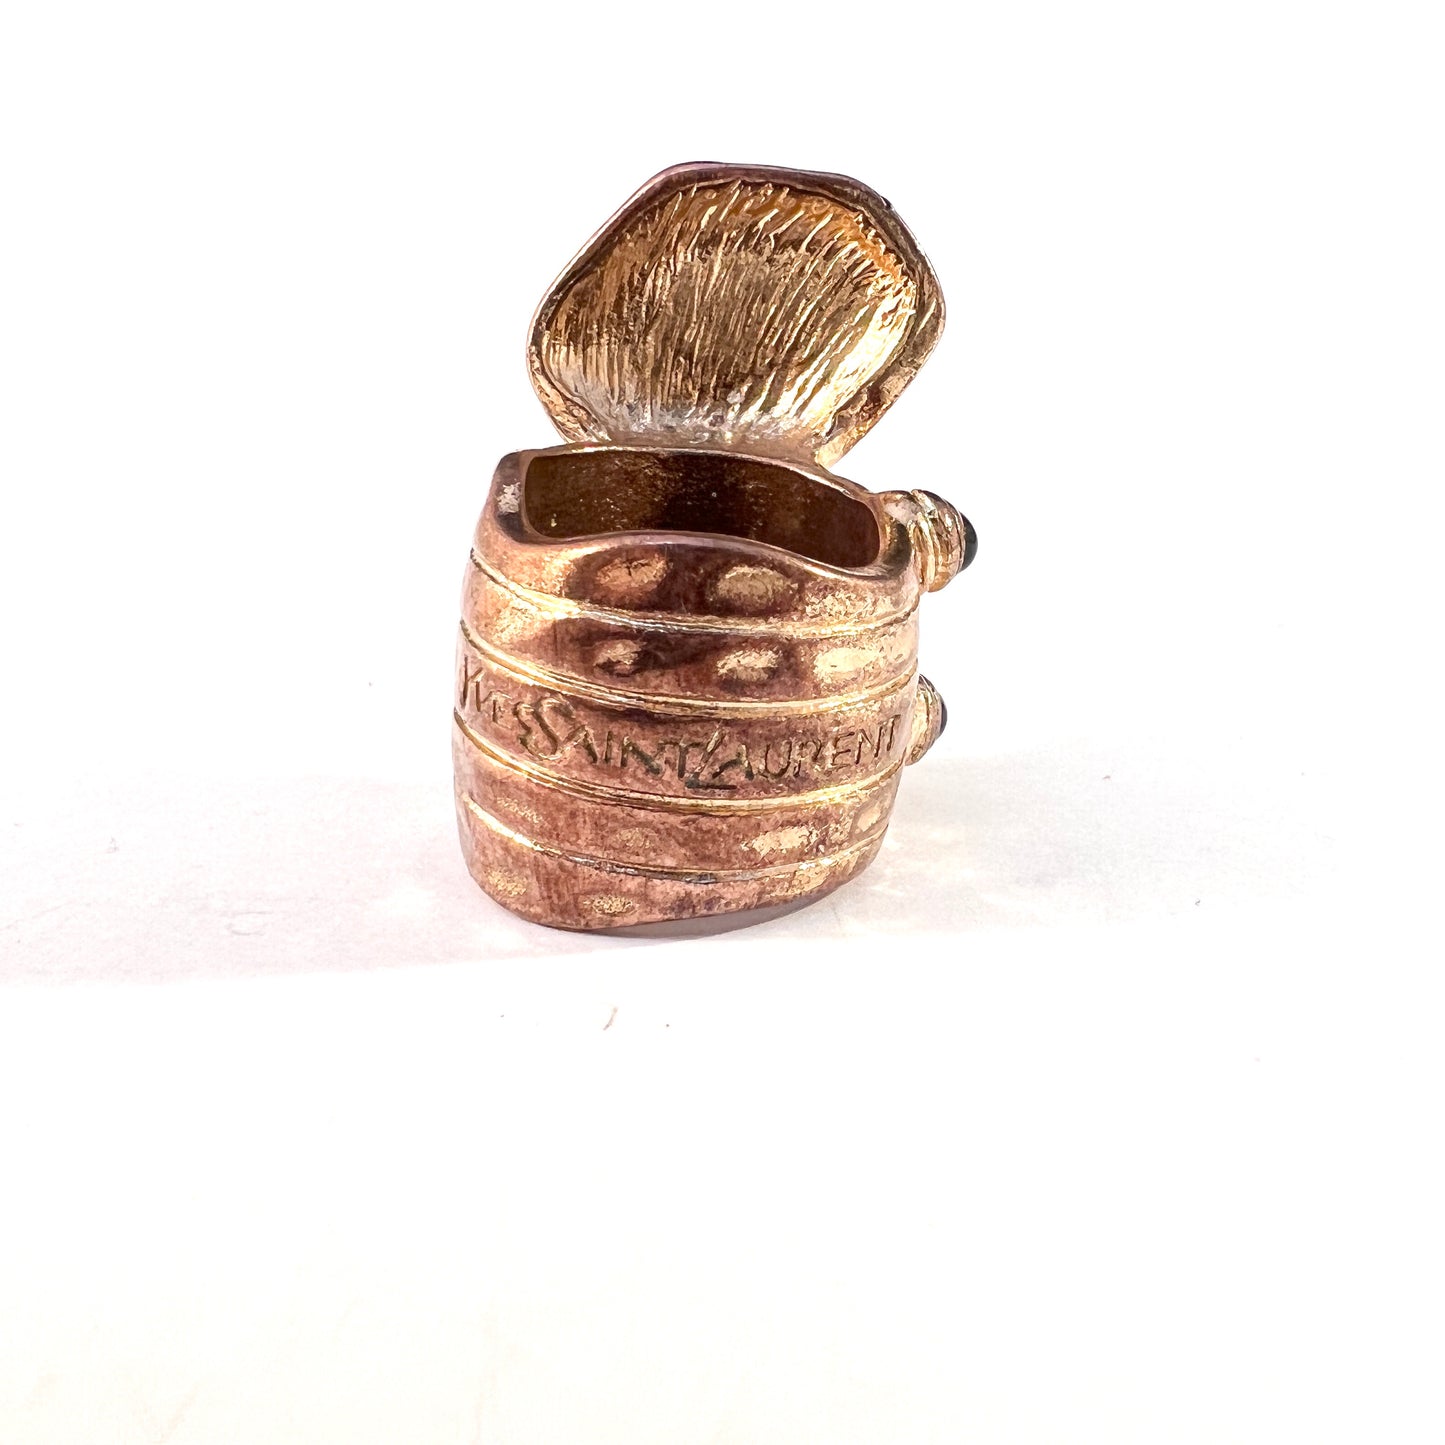 Yves Saint Laurent, Vintage Costume Jewelry Ring. "Arty"